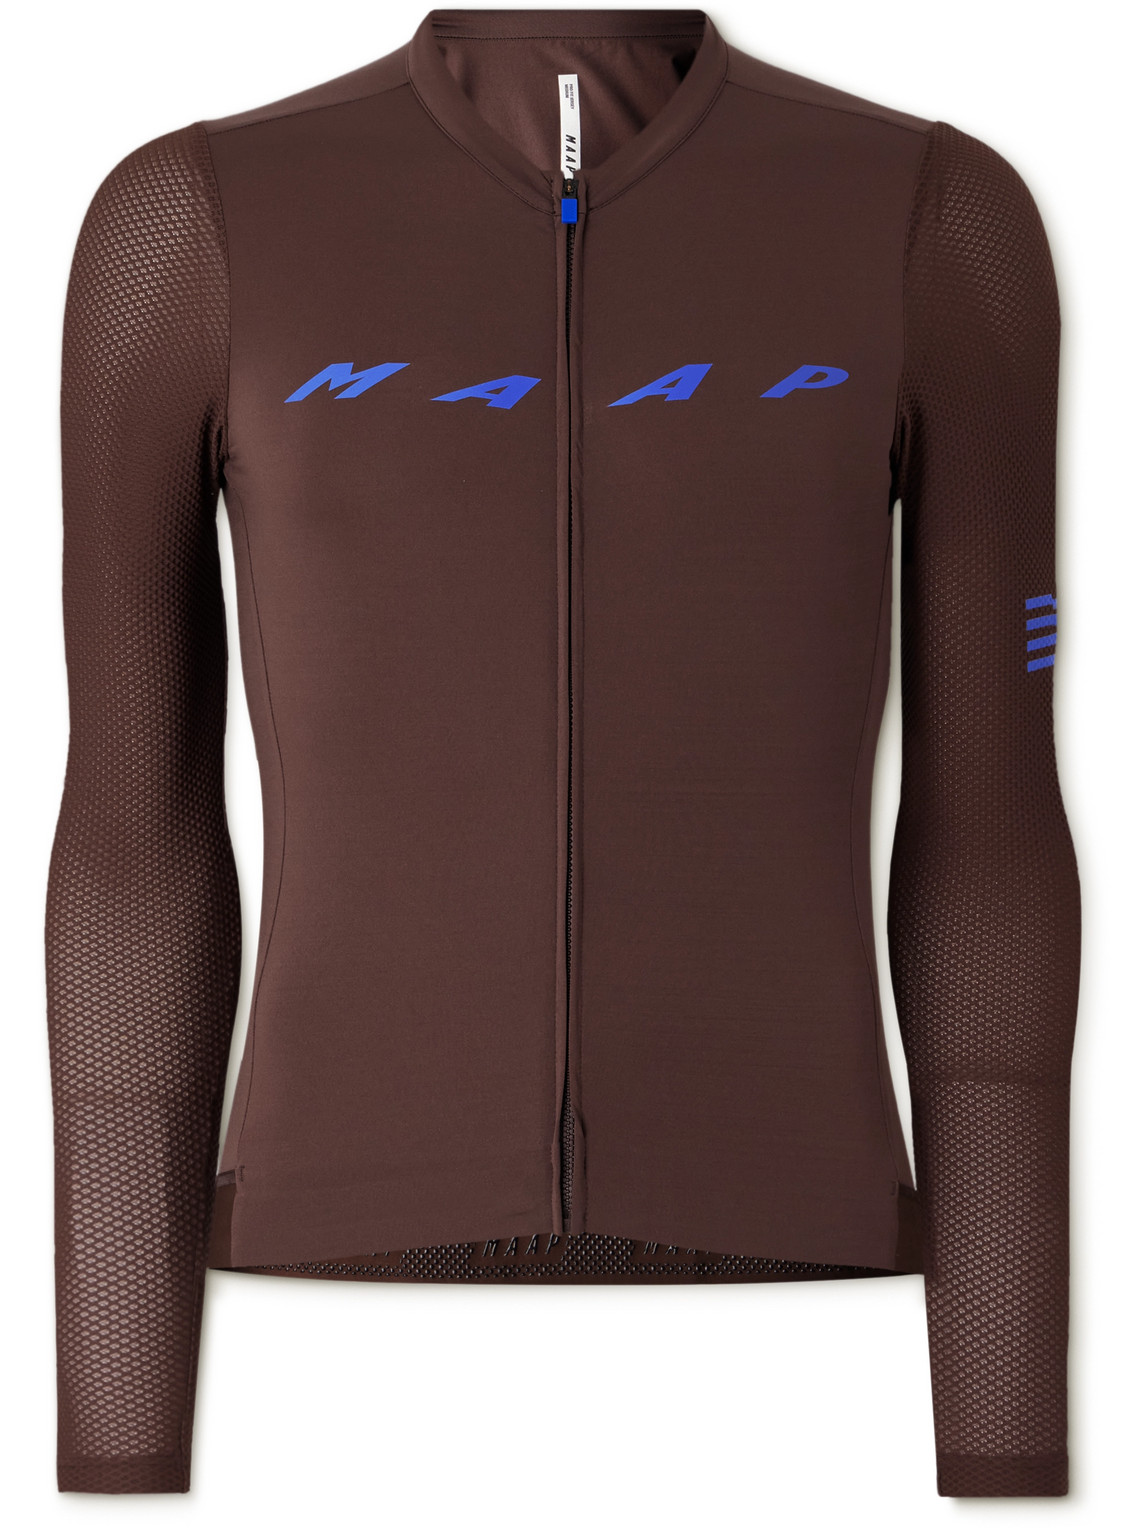 Evade Pro 2.0 Cycling Jersey